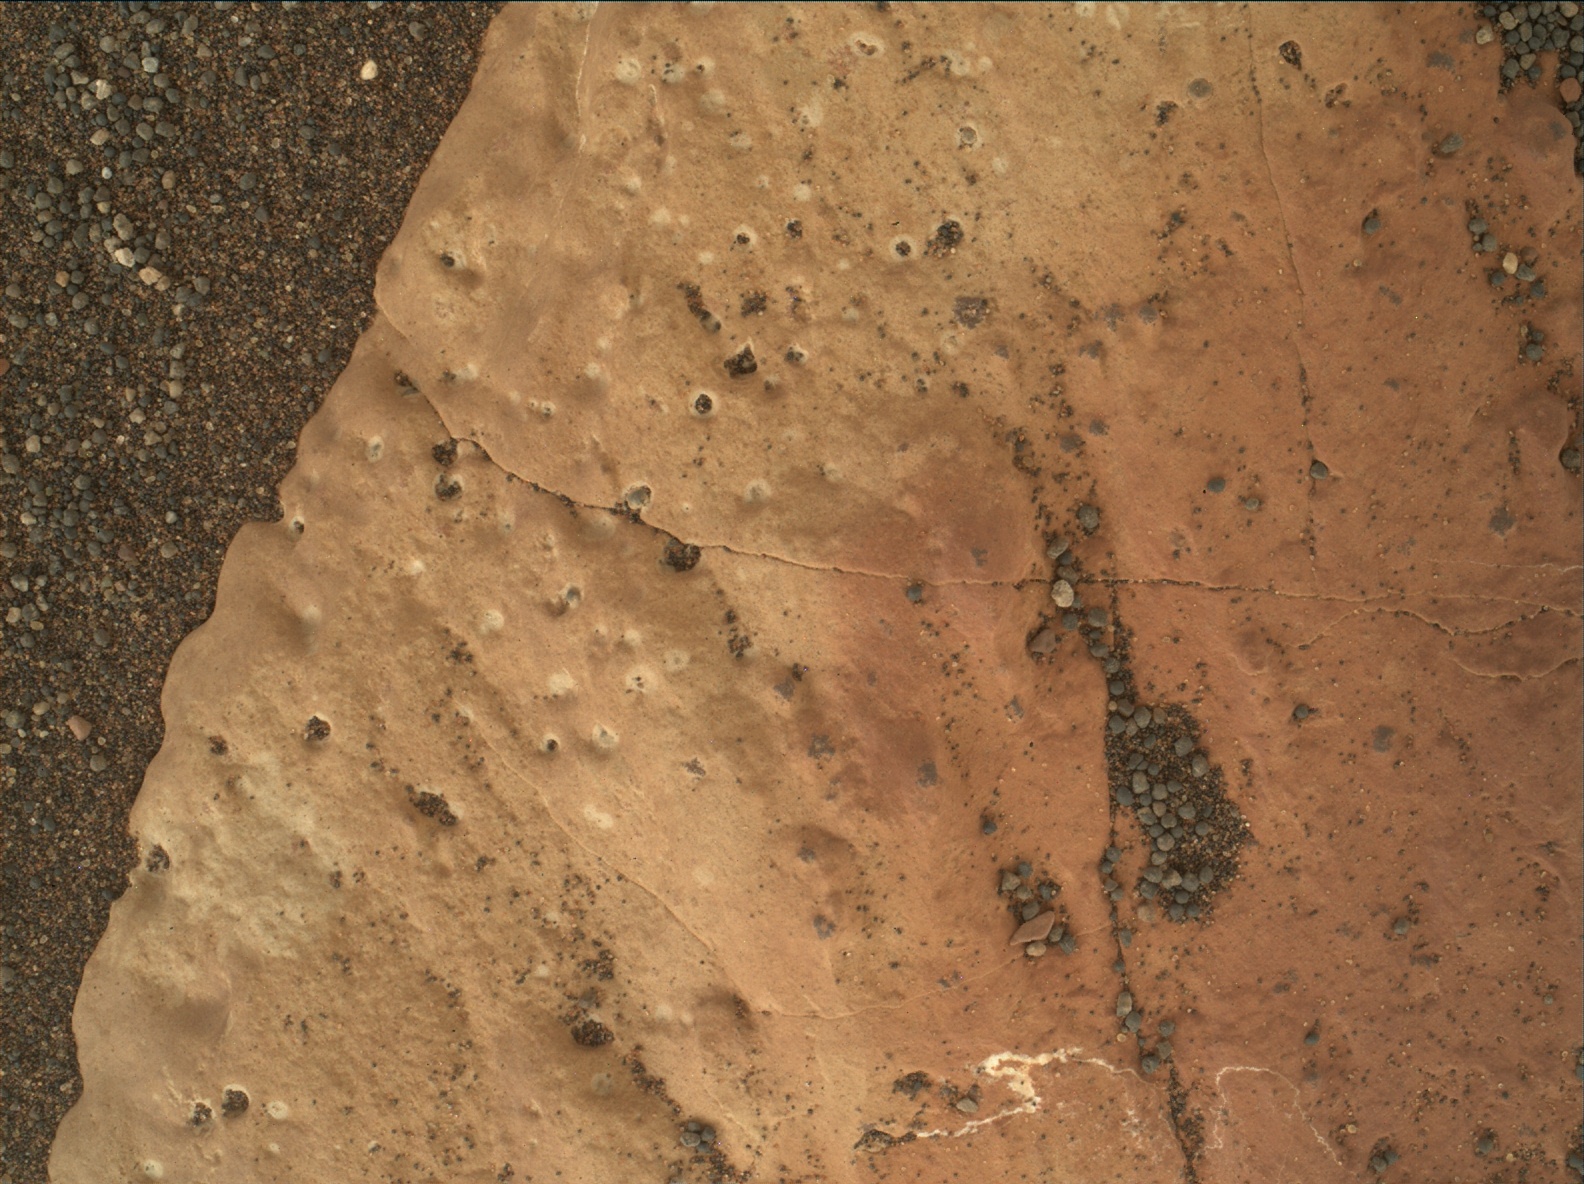 Nasa's Mars rover Curiosity acquired this image using its Mars Hand Lens Imager (MAHLI) on Sol 1575